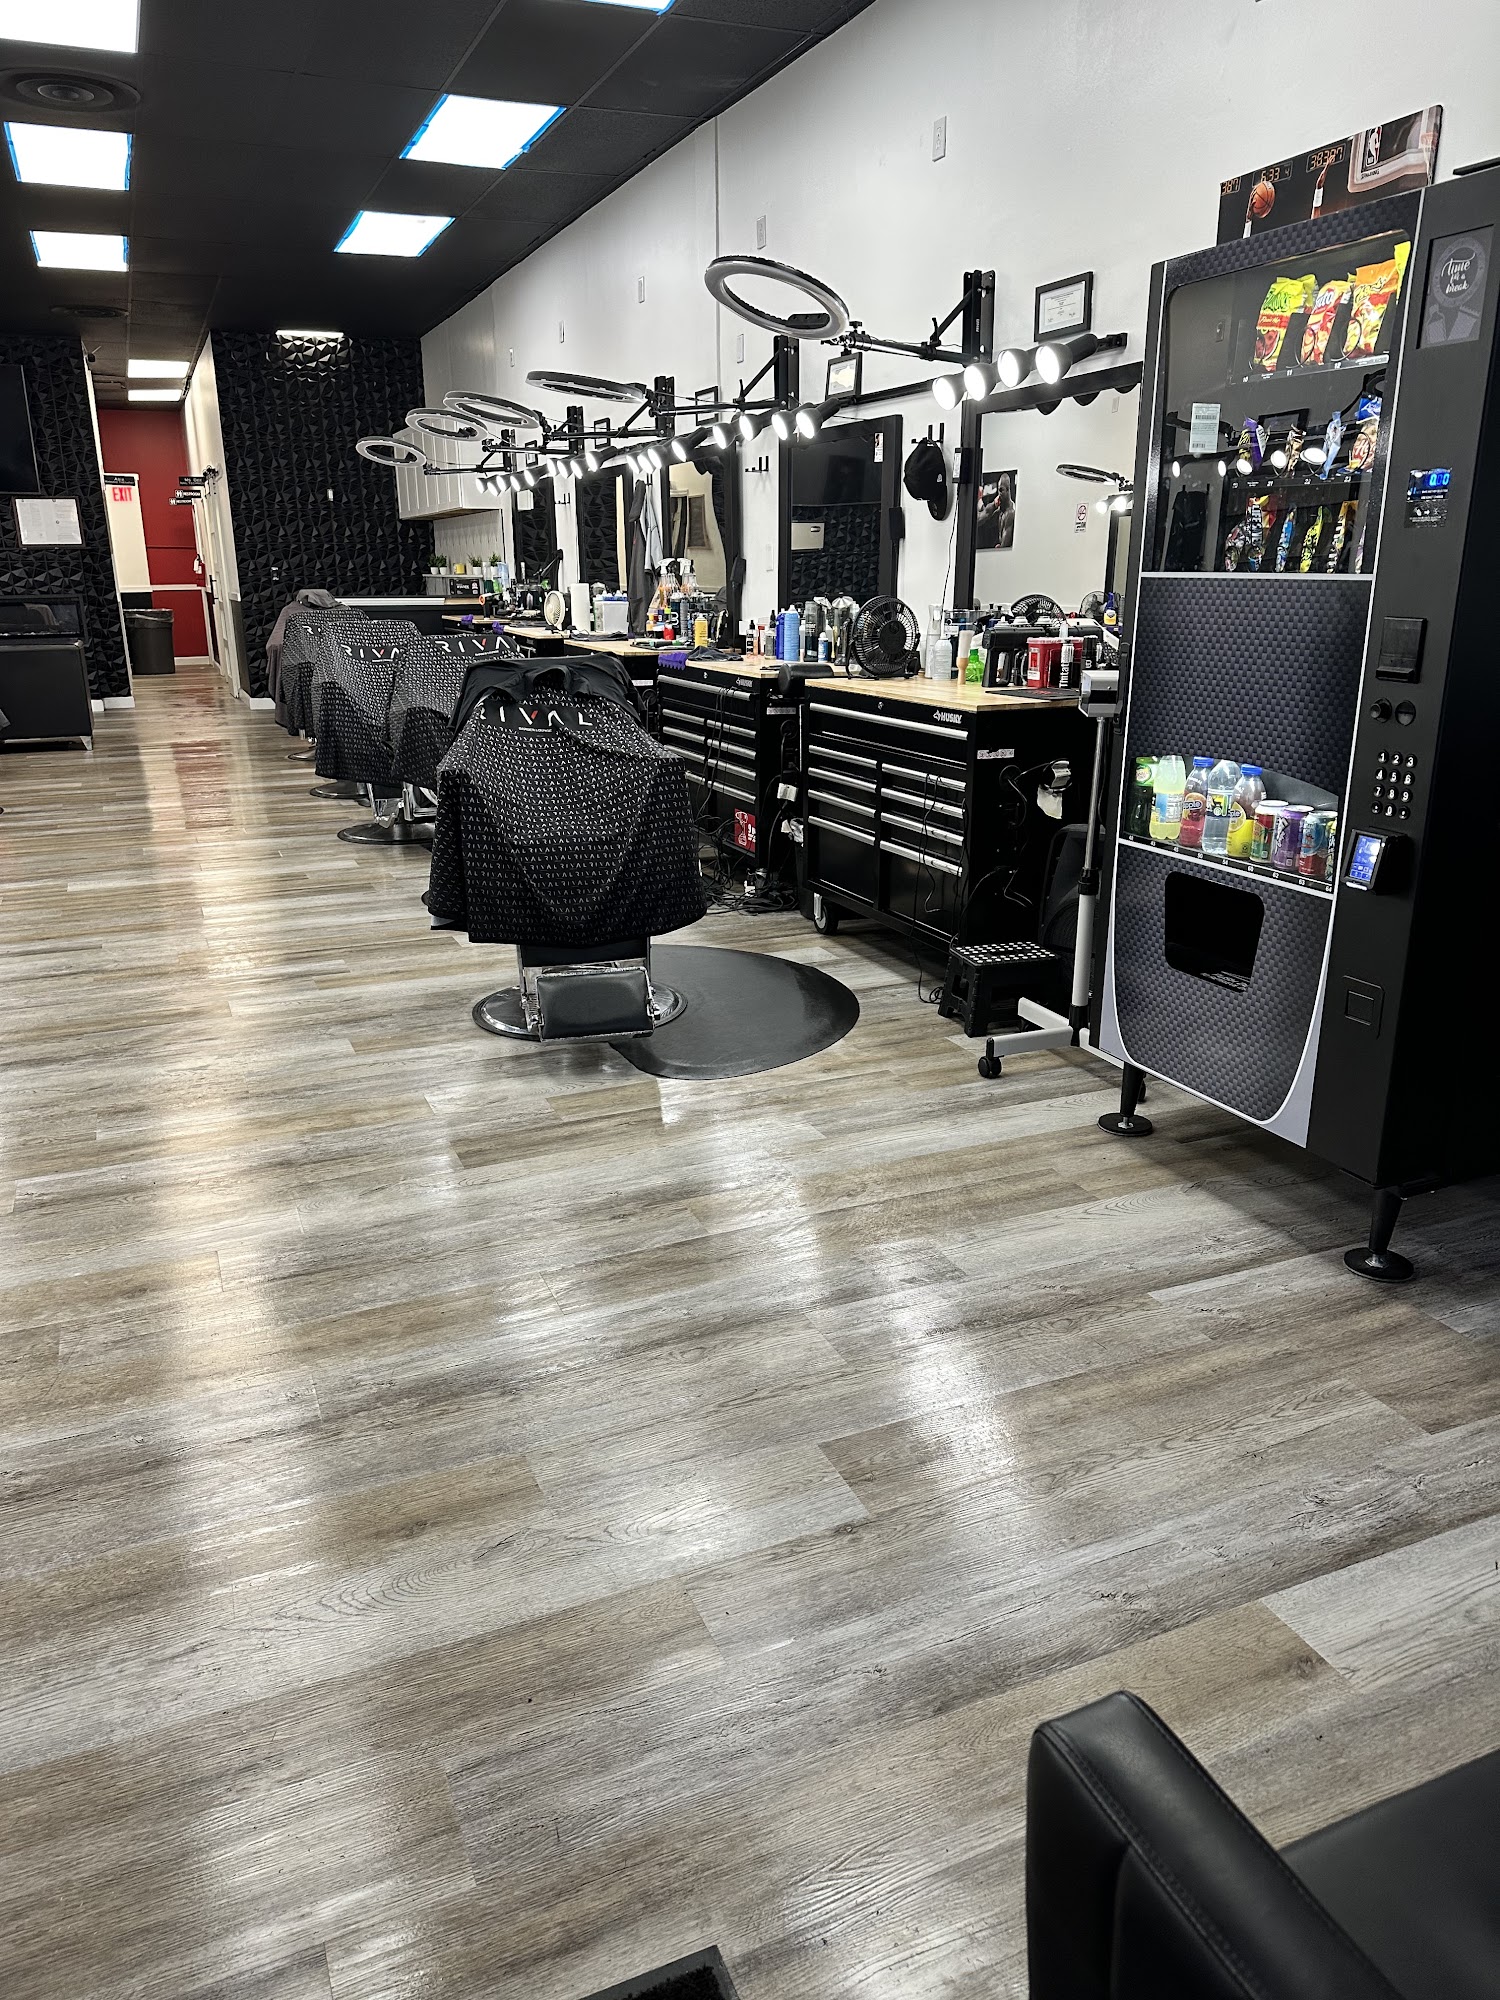 Rival Barber Lounge 21901 Emery Rd, Warrensville Heights Ohio 44128